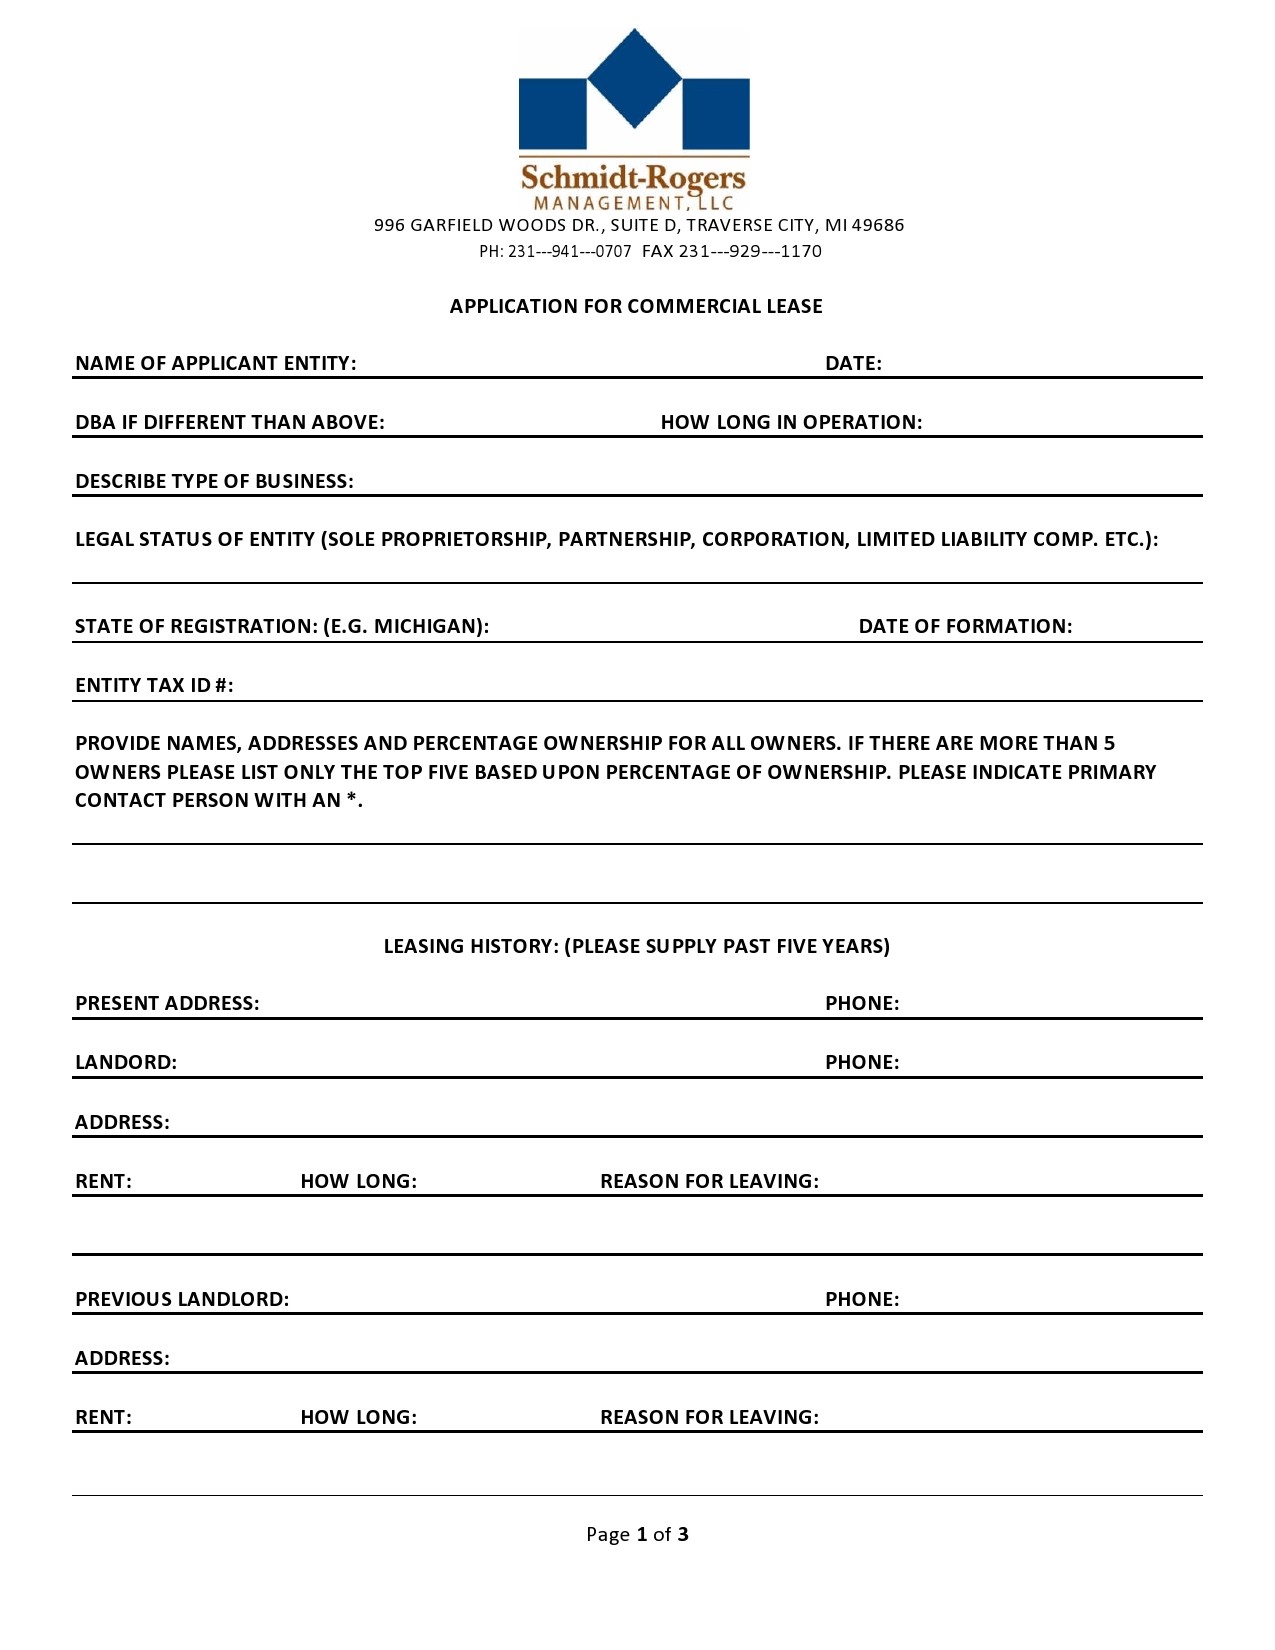 Free commercial lease application 17